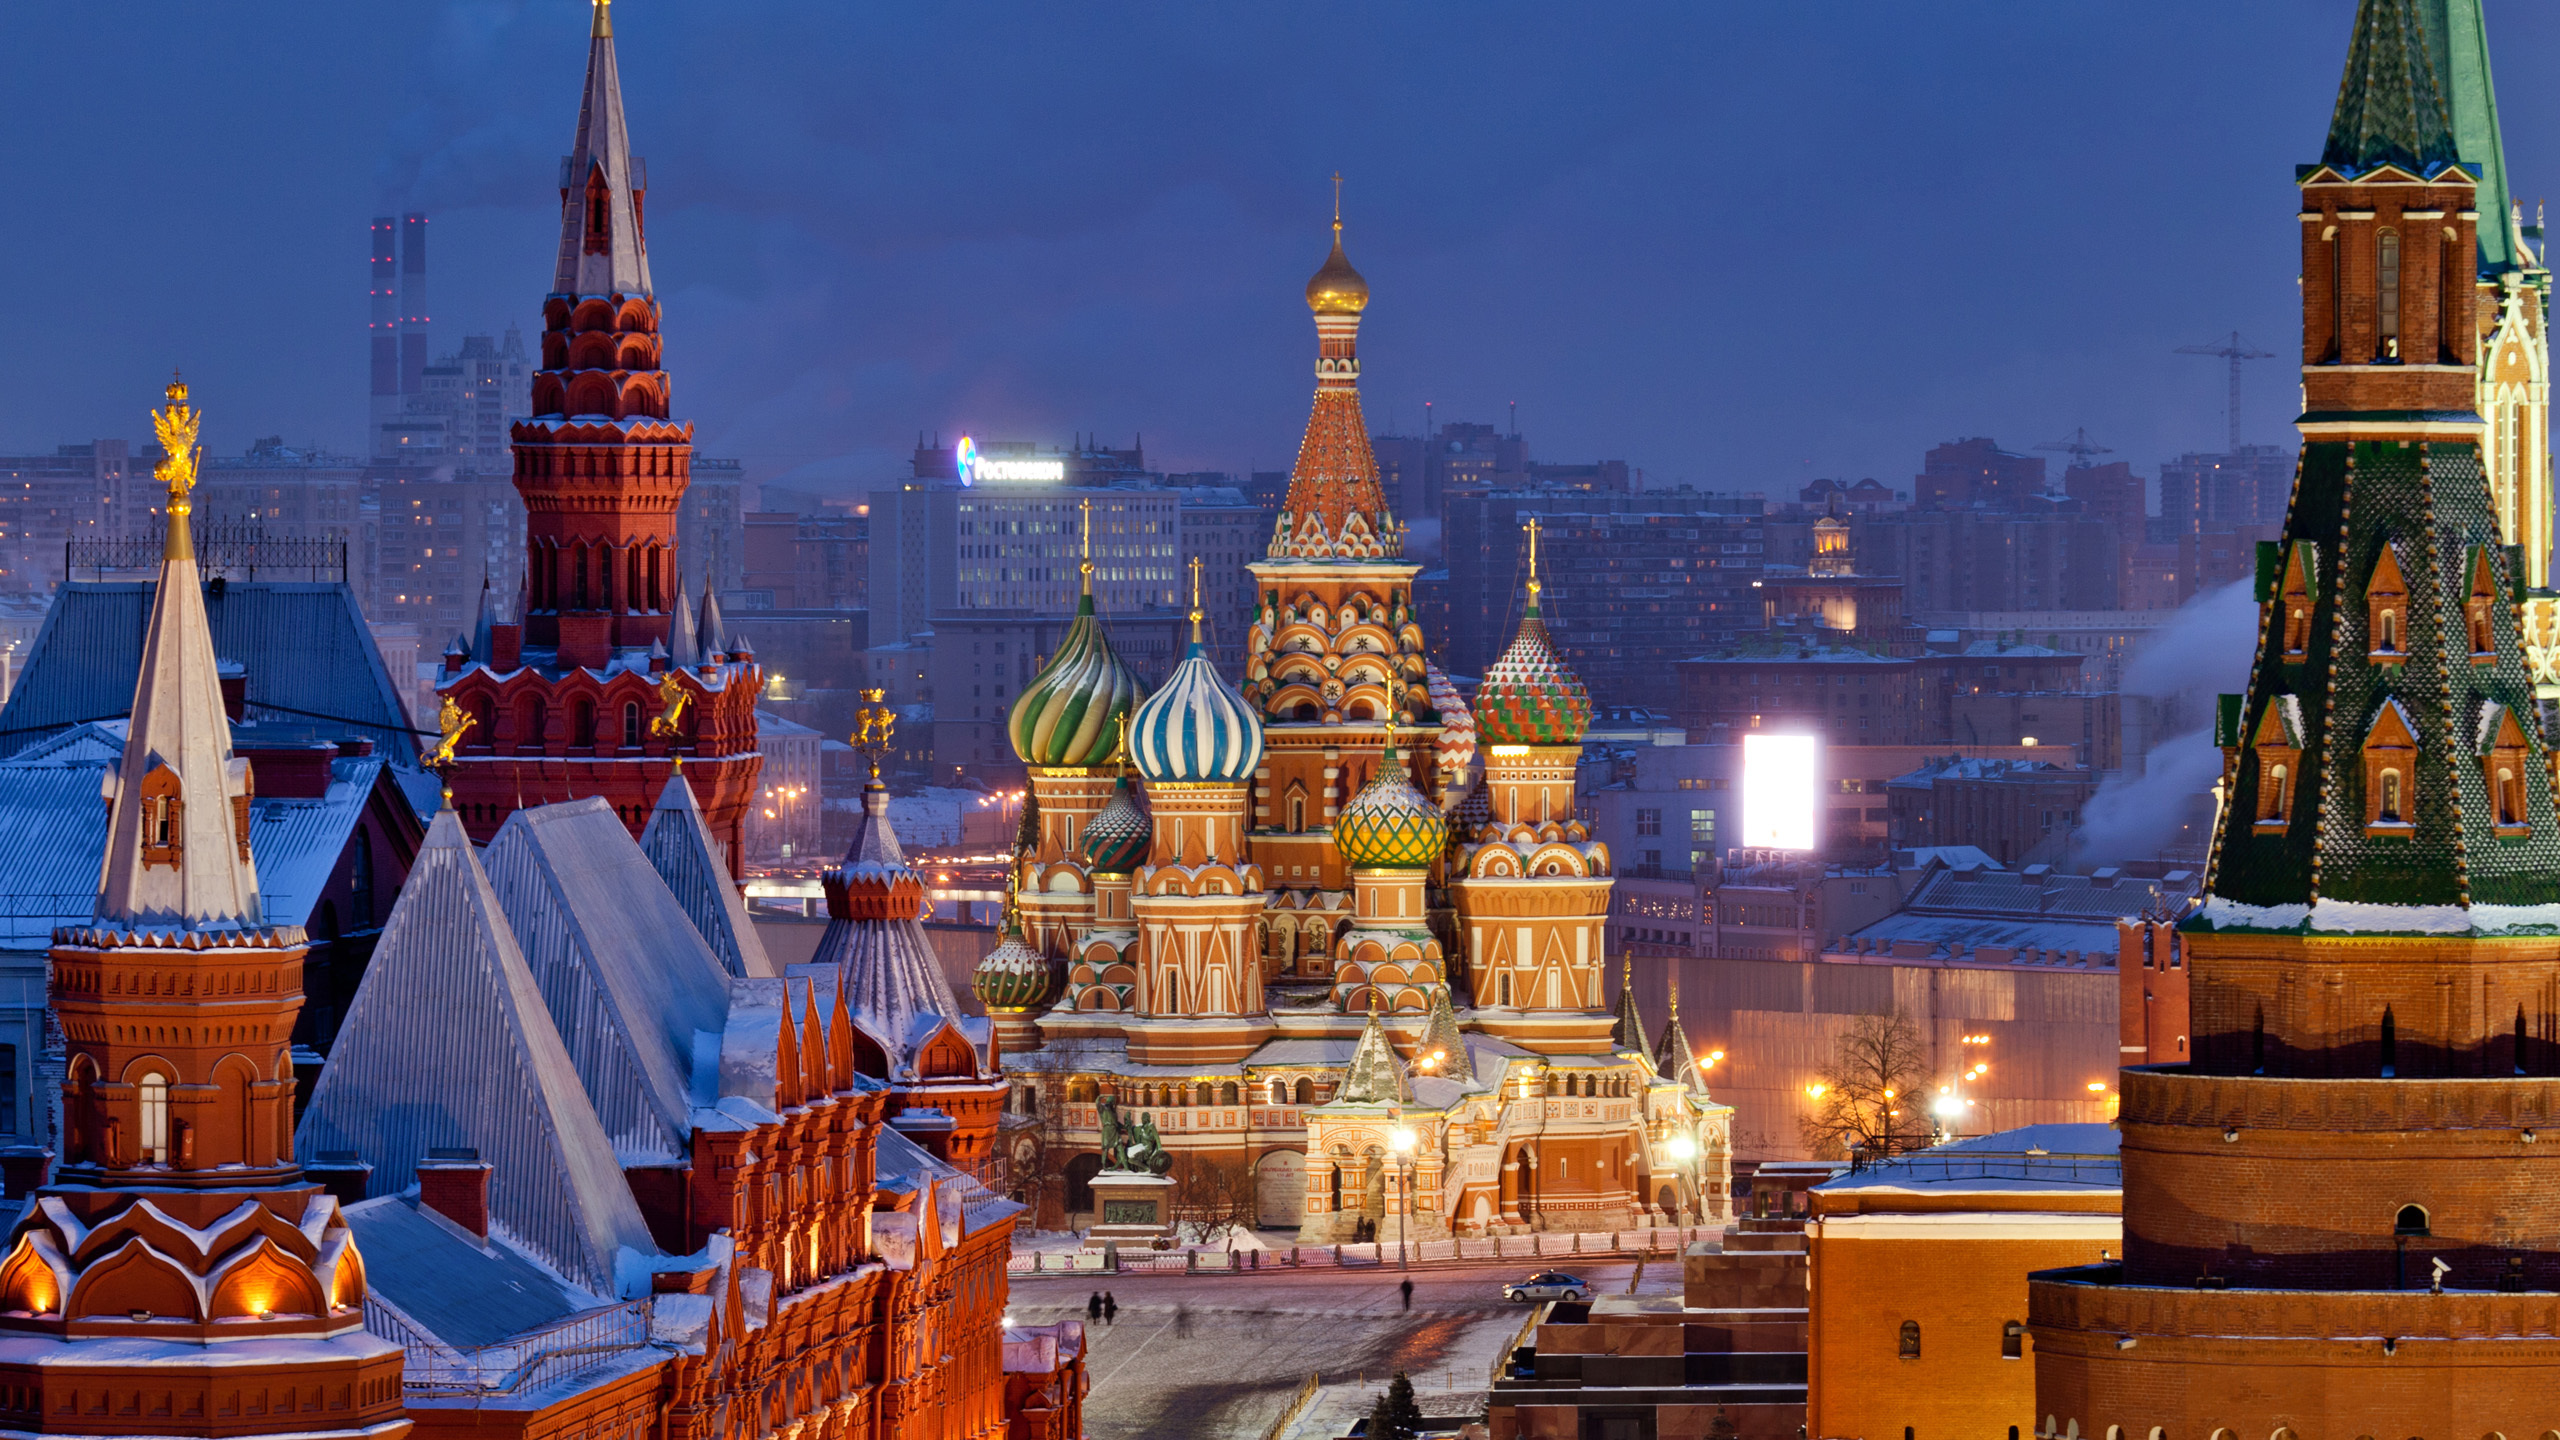 saint basil's cathedral, religious, cathedrals